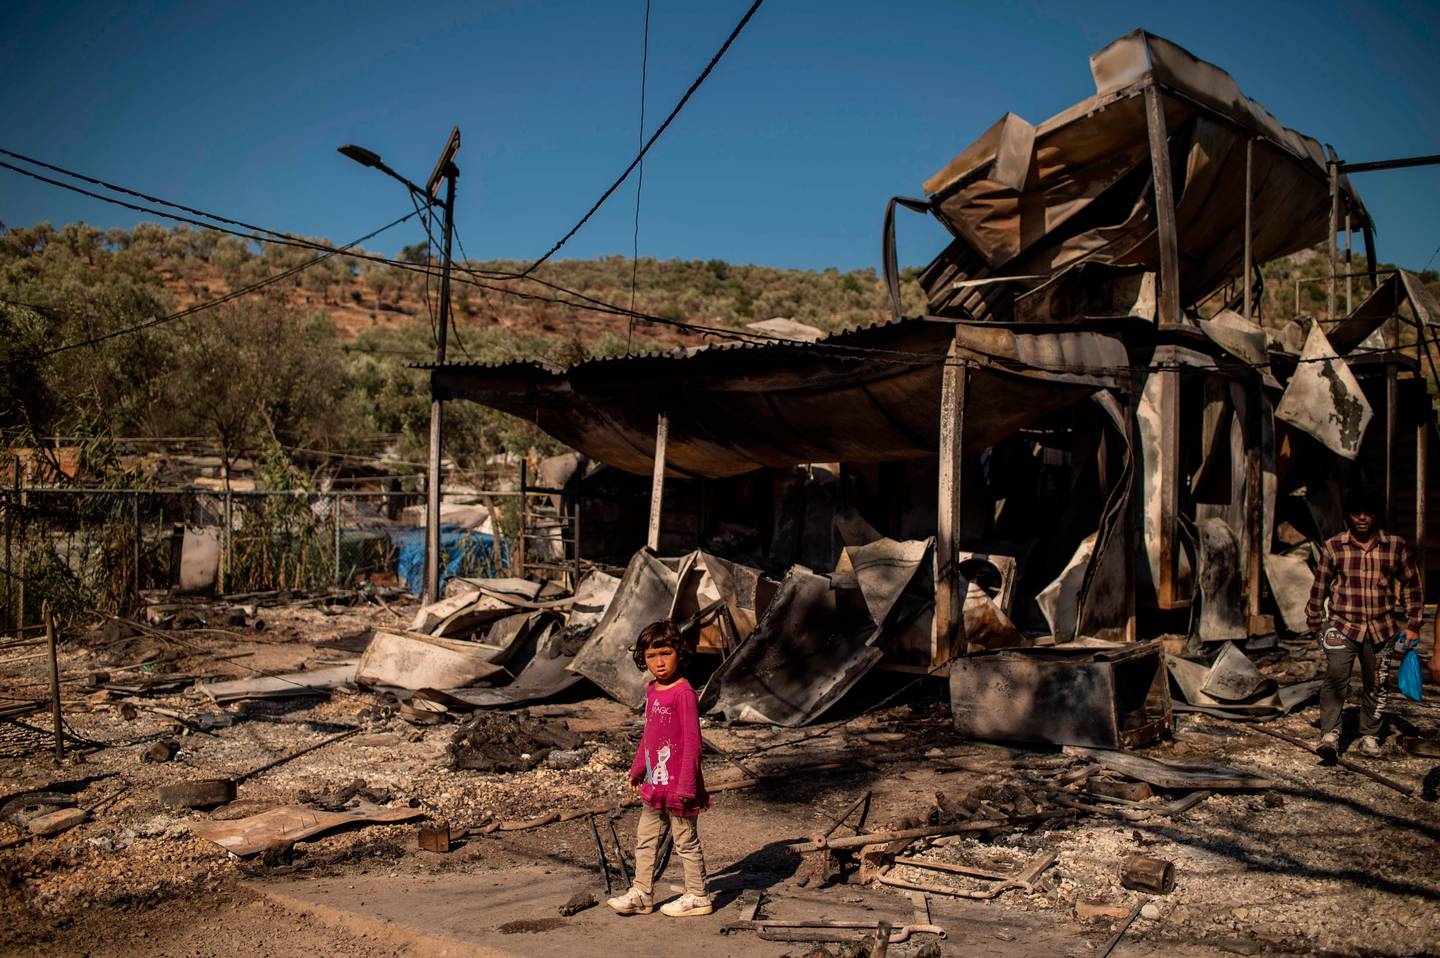 TOPSHOT - A girl stands amid rubbles in the burnt camp of Moria on the island of Lesbos after a major fire broke out, on September 9, 2020. - Thousands of asylum seekers on the Greek island of Lesbos fled for their lives on September 9, 2020 as a huge fire ripped through the camp of Moria, the country's largest and most notorious migrant facility. Over 12,000 men, women and children ran in panic out of containers and tents and into adjoining olive groves and fields as the fire destroyed most of the overcrowded, squalid camp. The blaze started just hours after the migration ministry said that 35 people had tested positive at the camp. (Photo by ANGELOS TZORTZINIS / AFP)